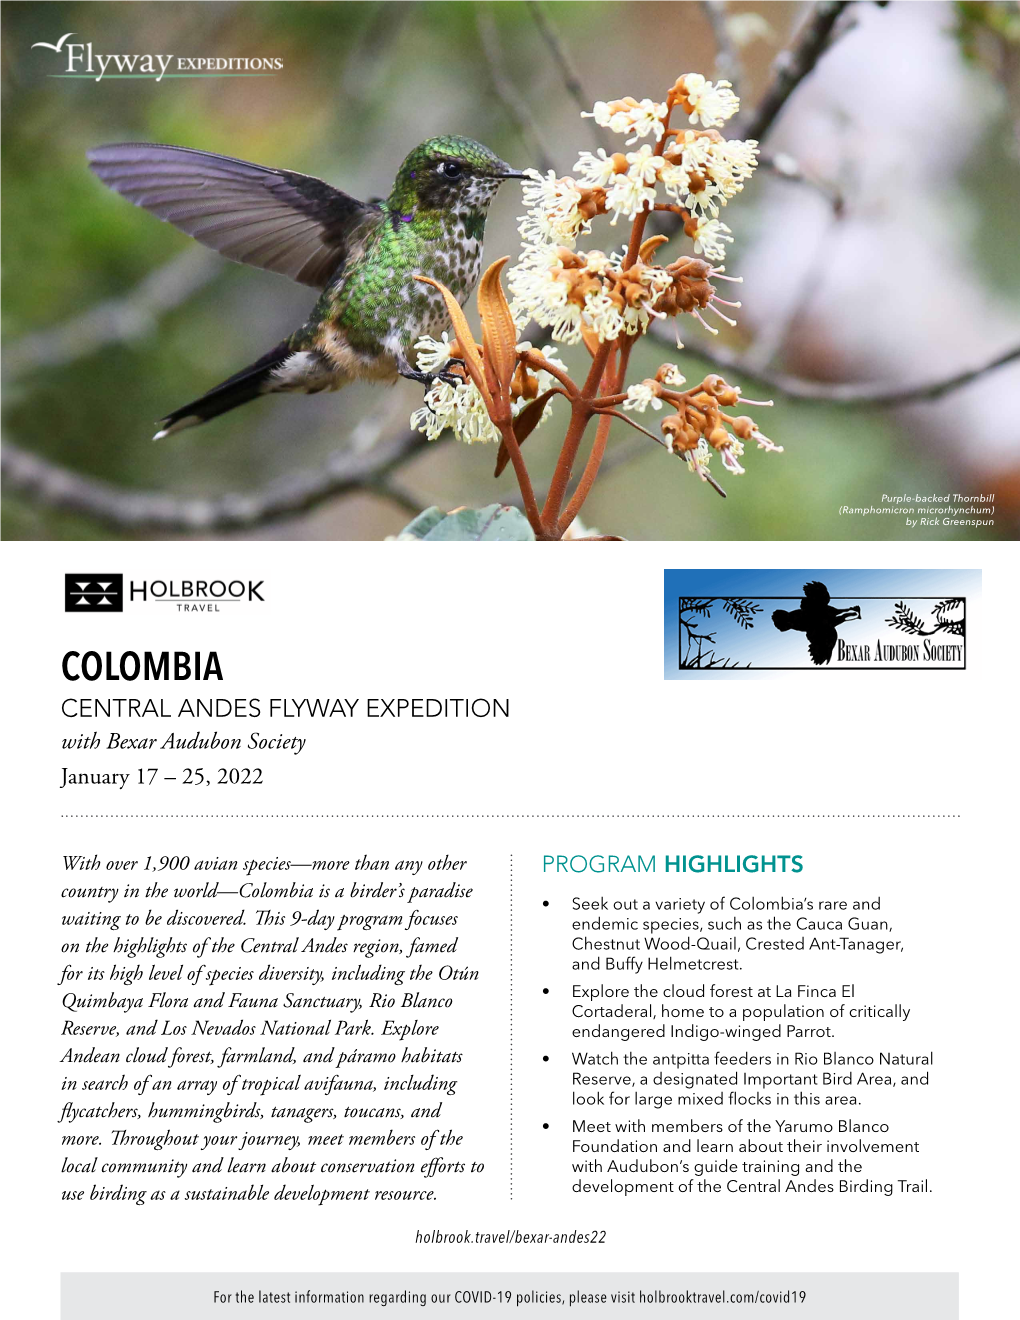 Colombia Central Andes Flyway Expedition with Bexar Audubon Society January 17 – 25, 2022